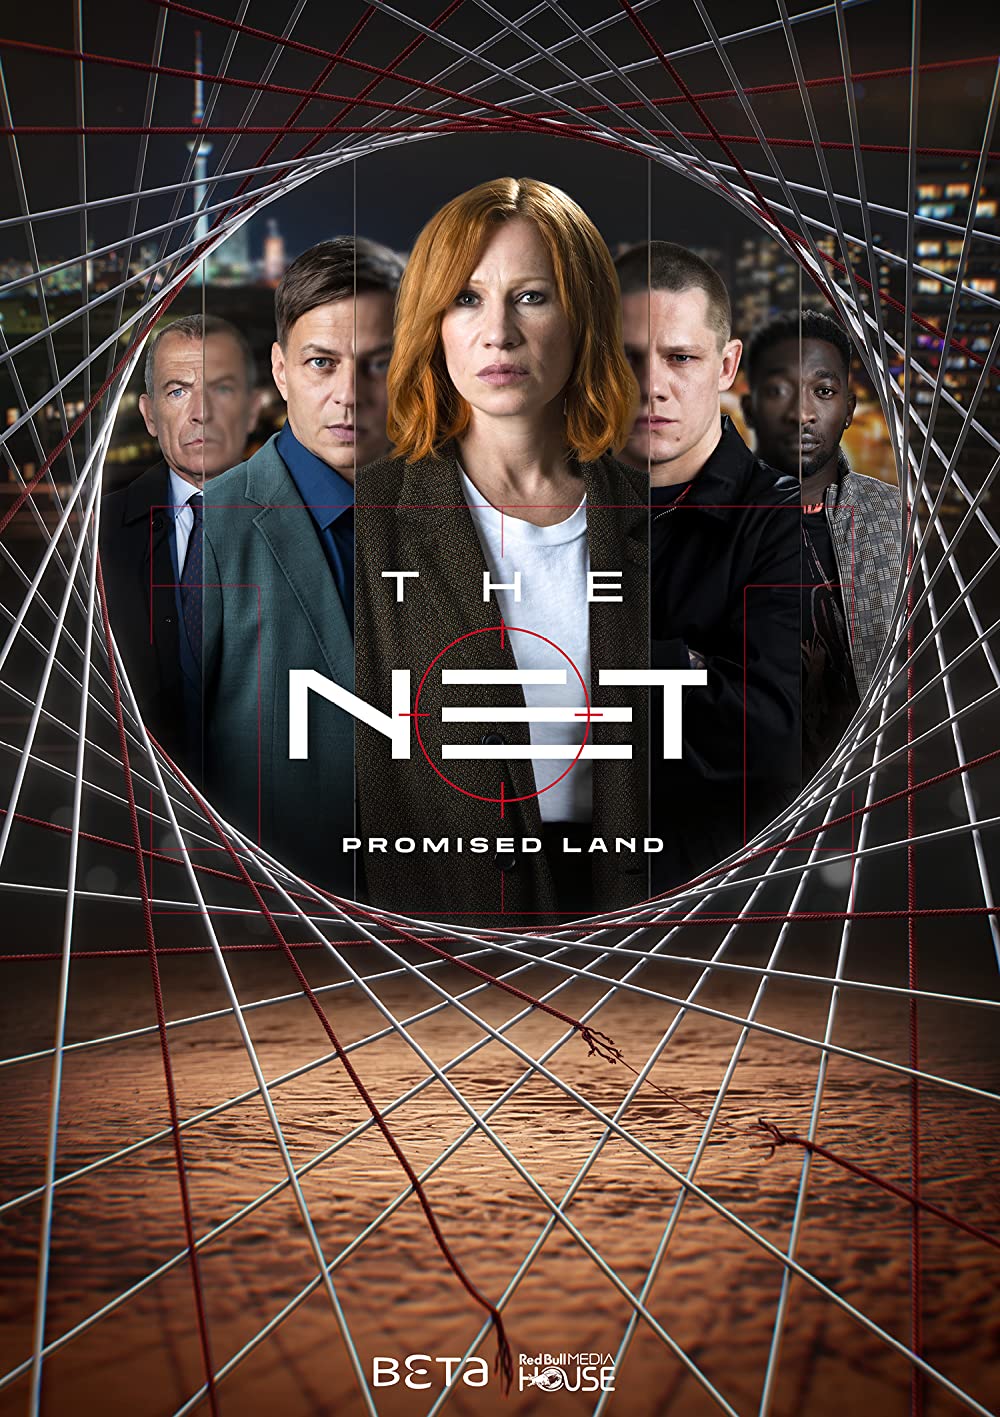 The Net - Promised land Seizoen 1 Compleet (incl subs)